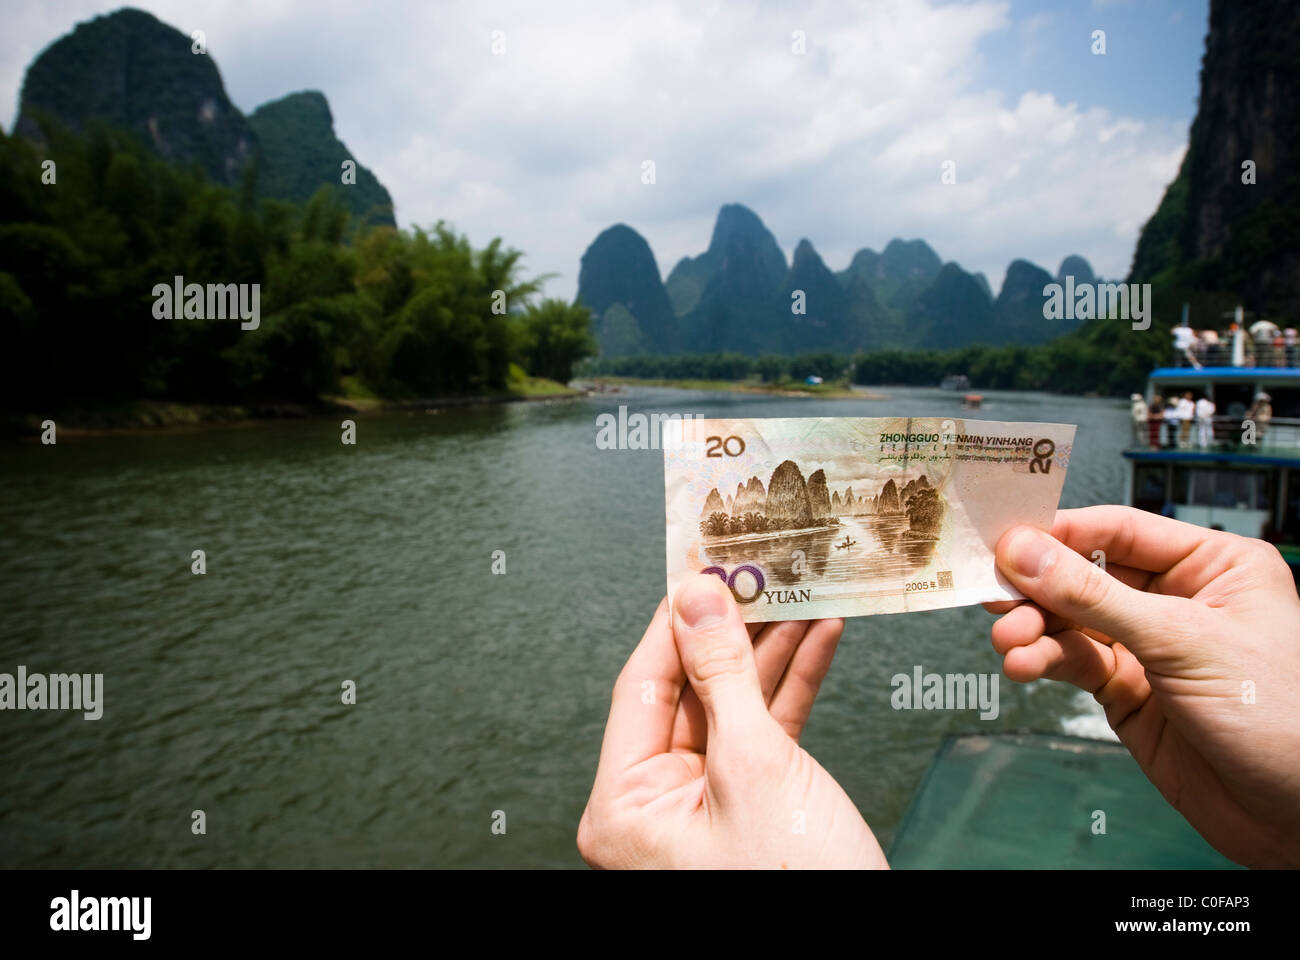 picture of 20 Yuan note taken while passing the very karst formation that is featuring on the note itself Stock Photo